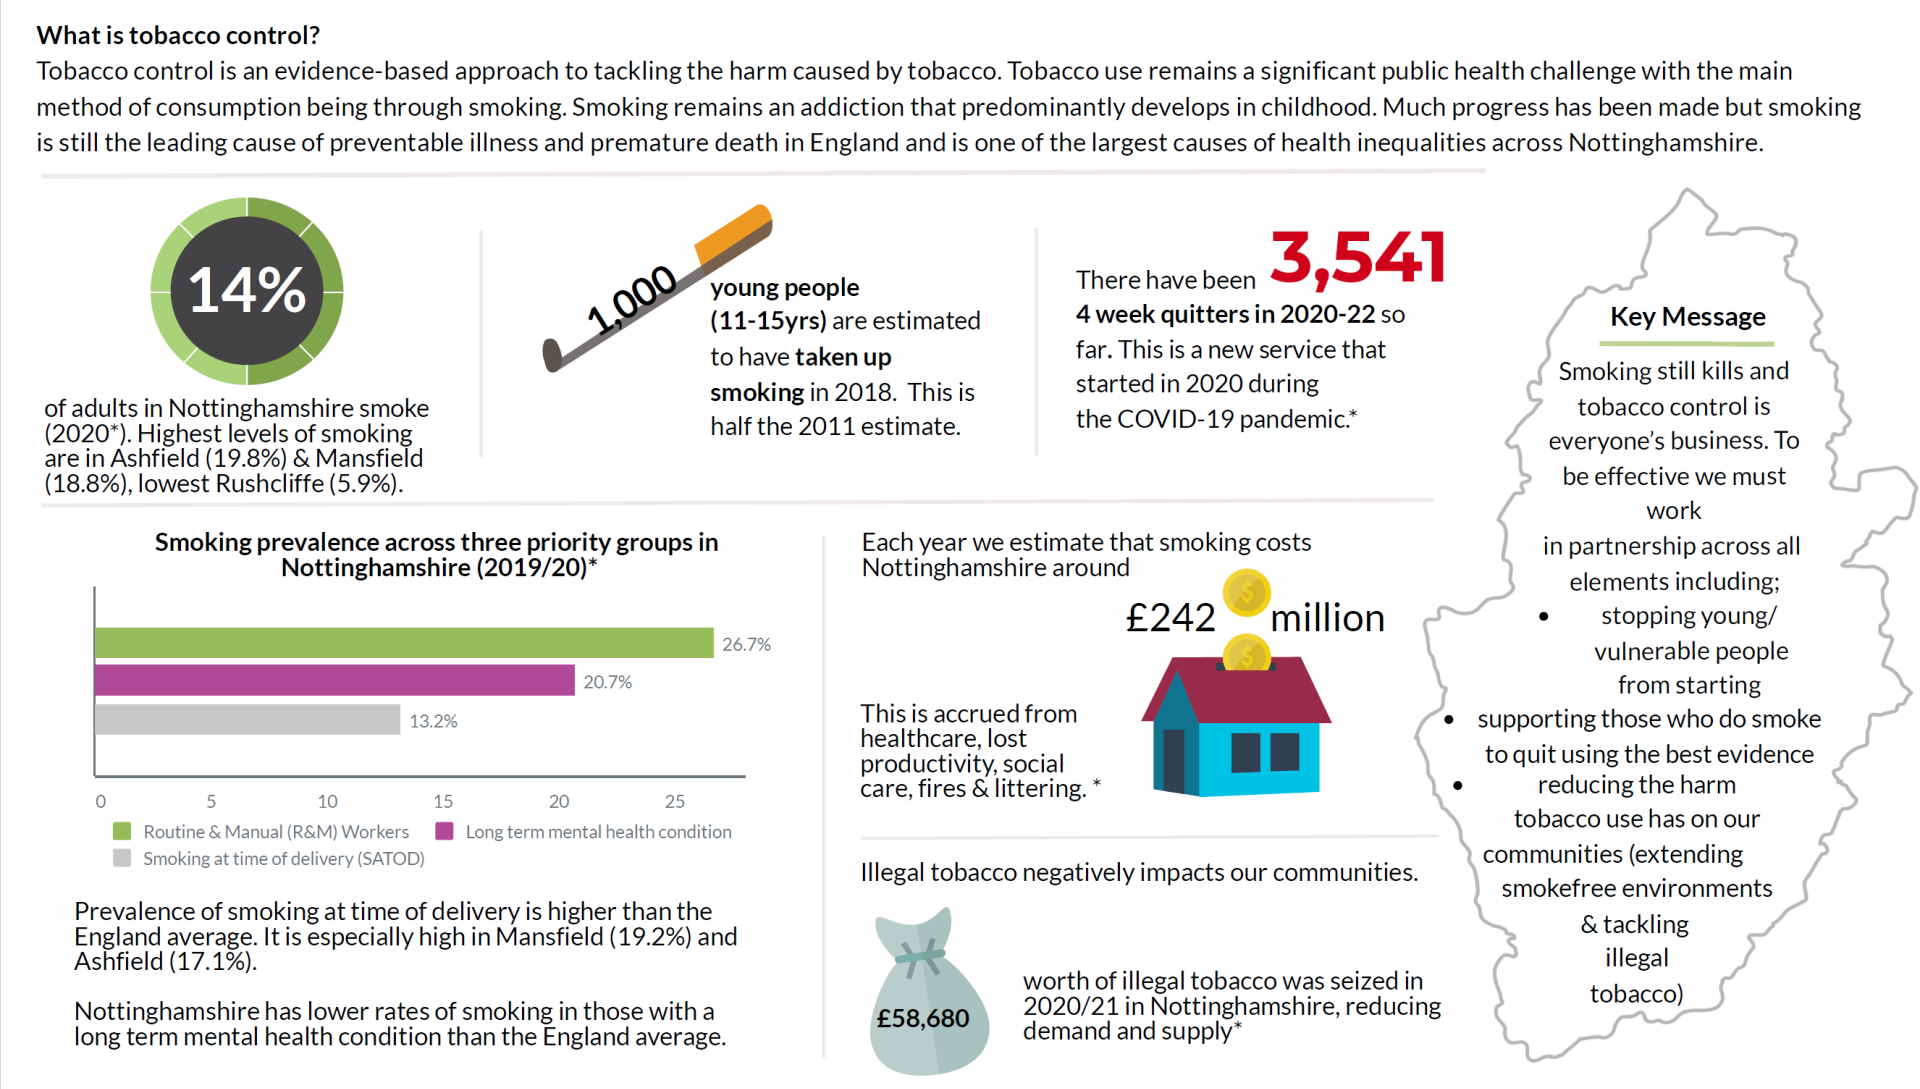 Infographic showing tobacco control statistics for Nottinghamshire